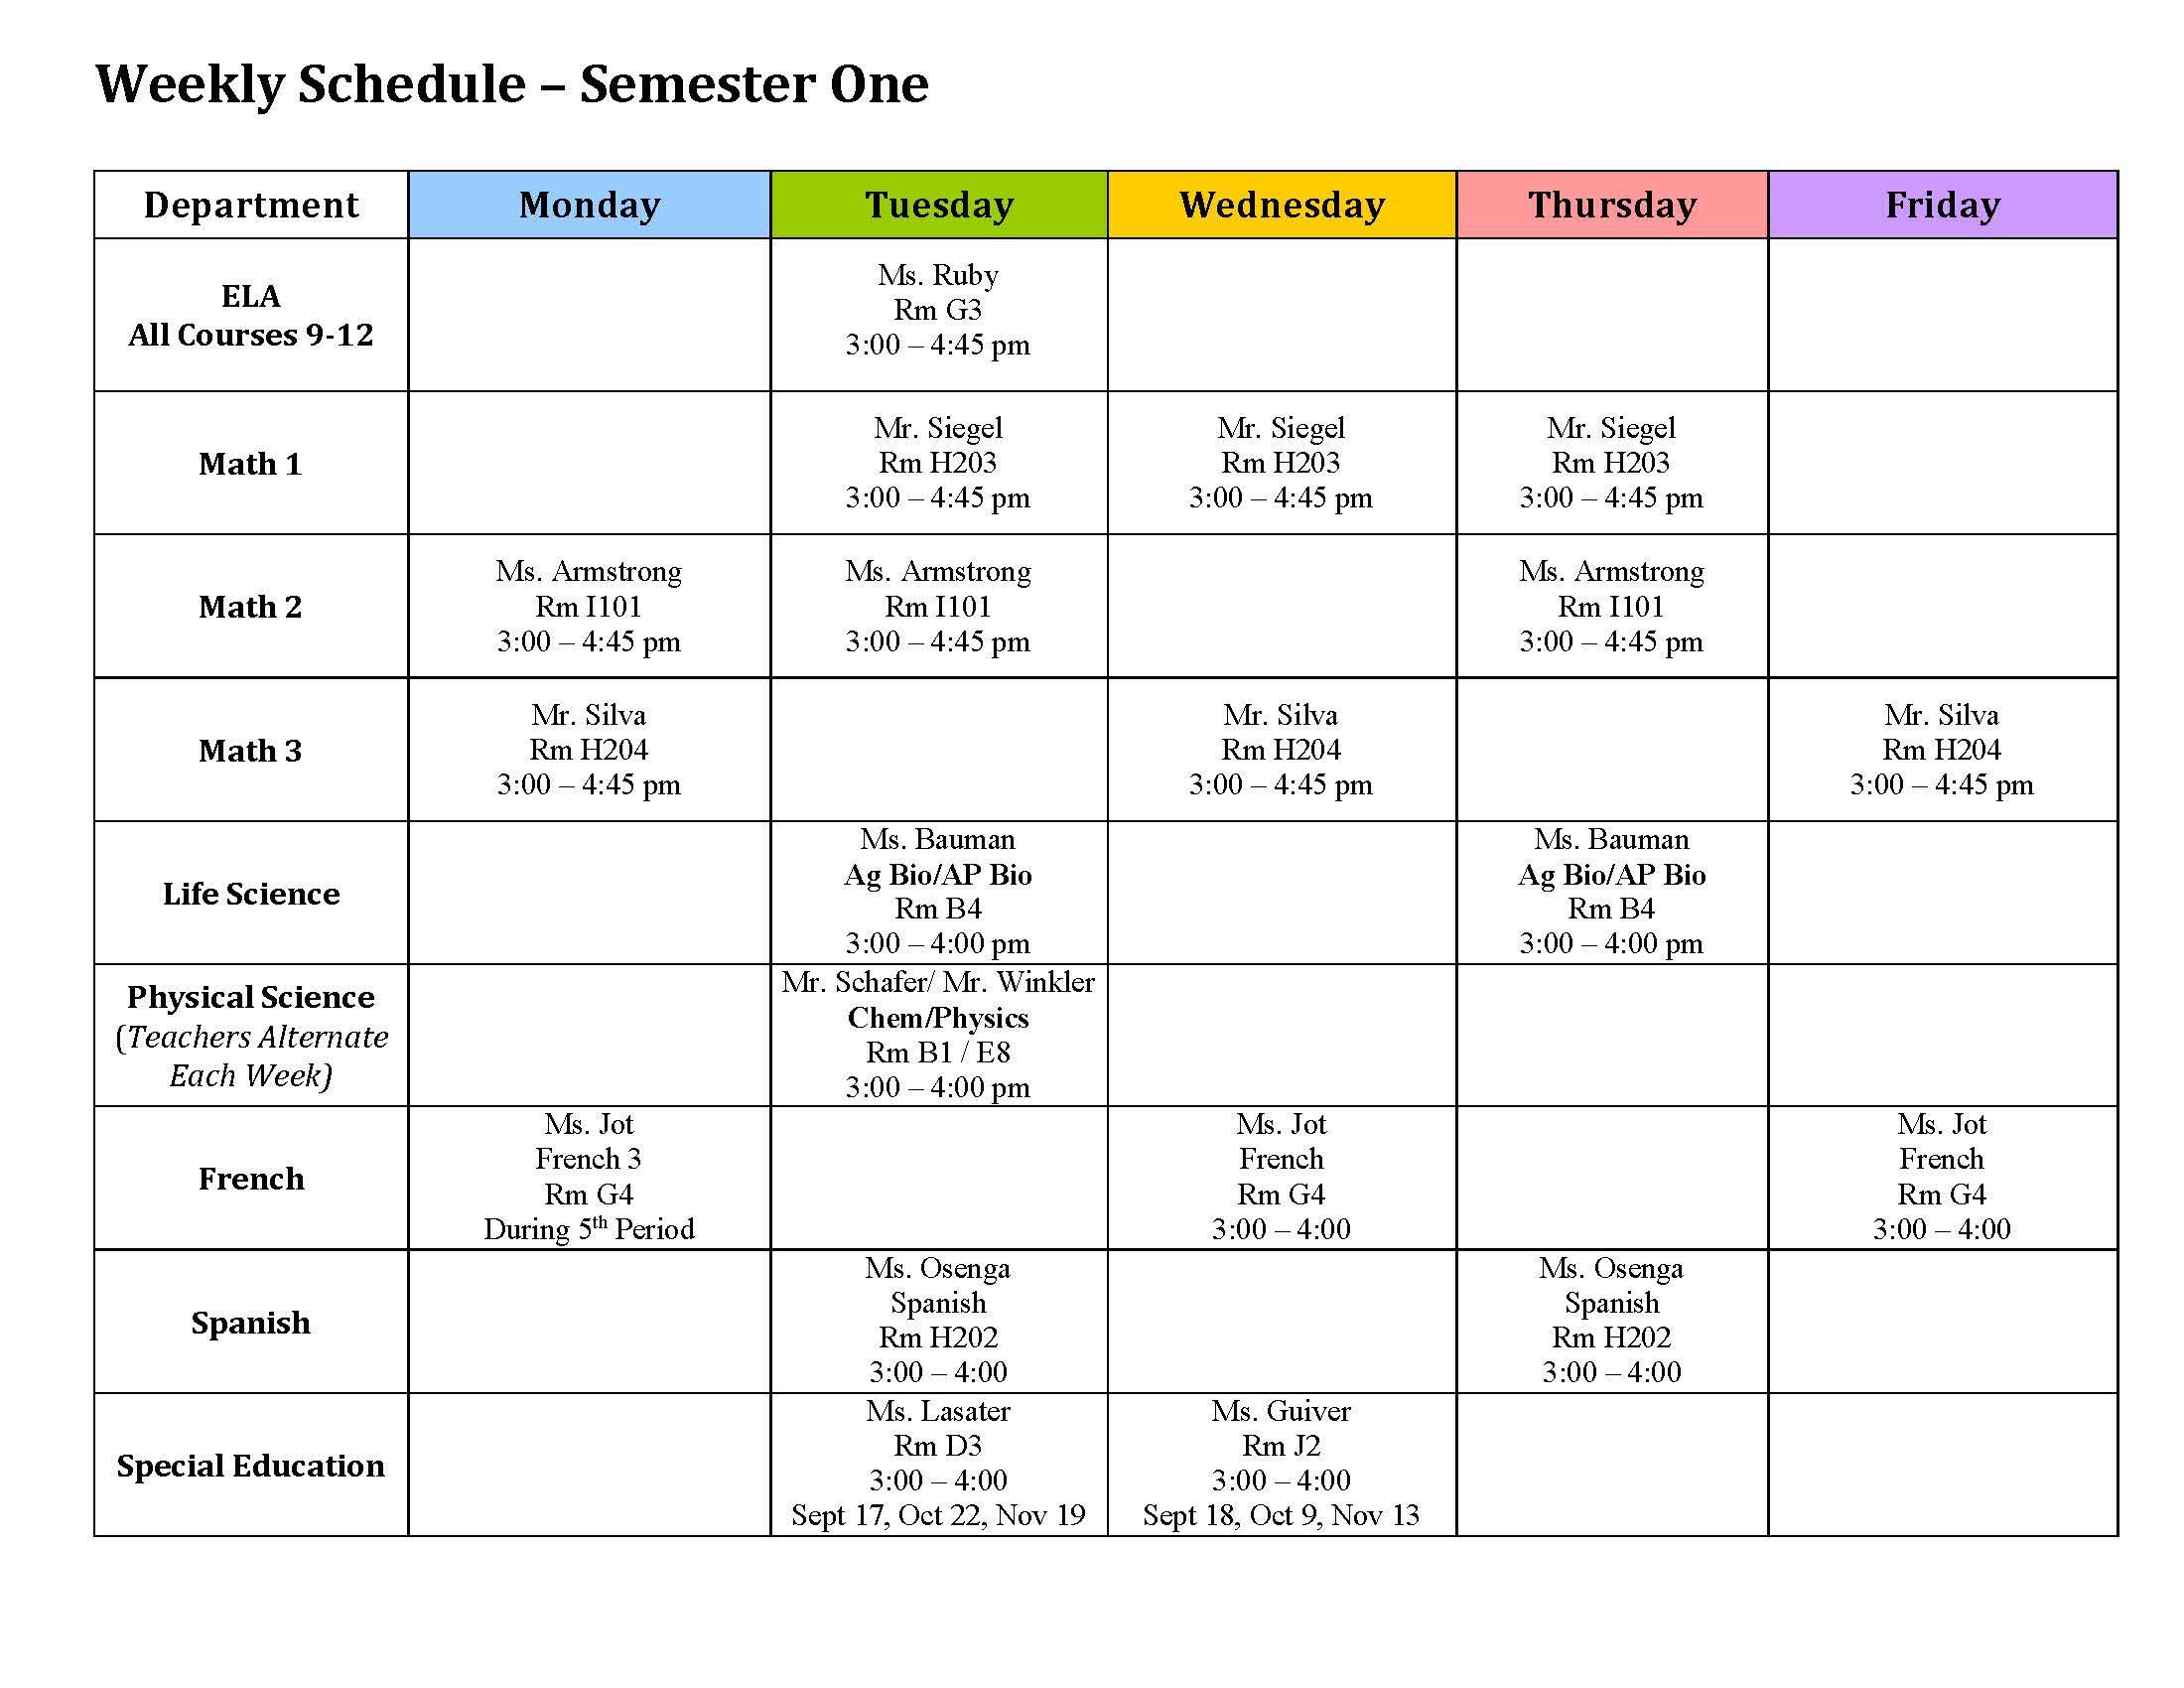 academic support schedule; call 335-4425 x201 for information